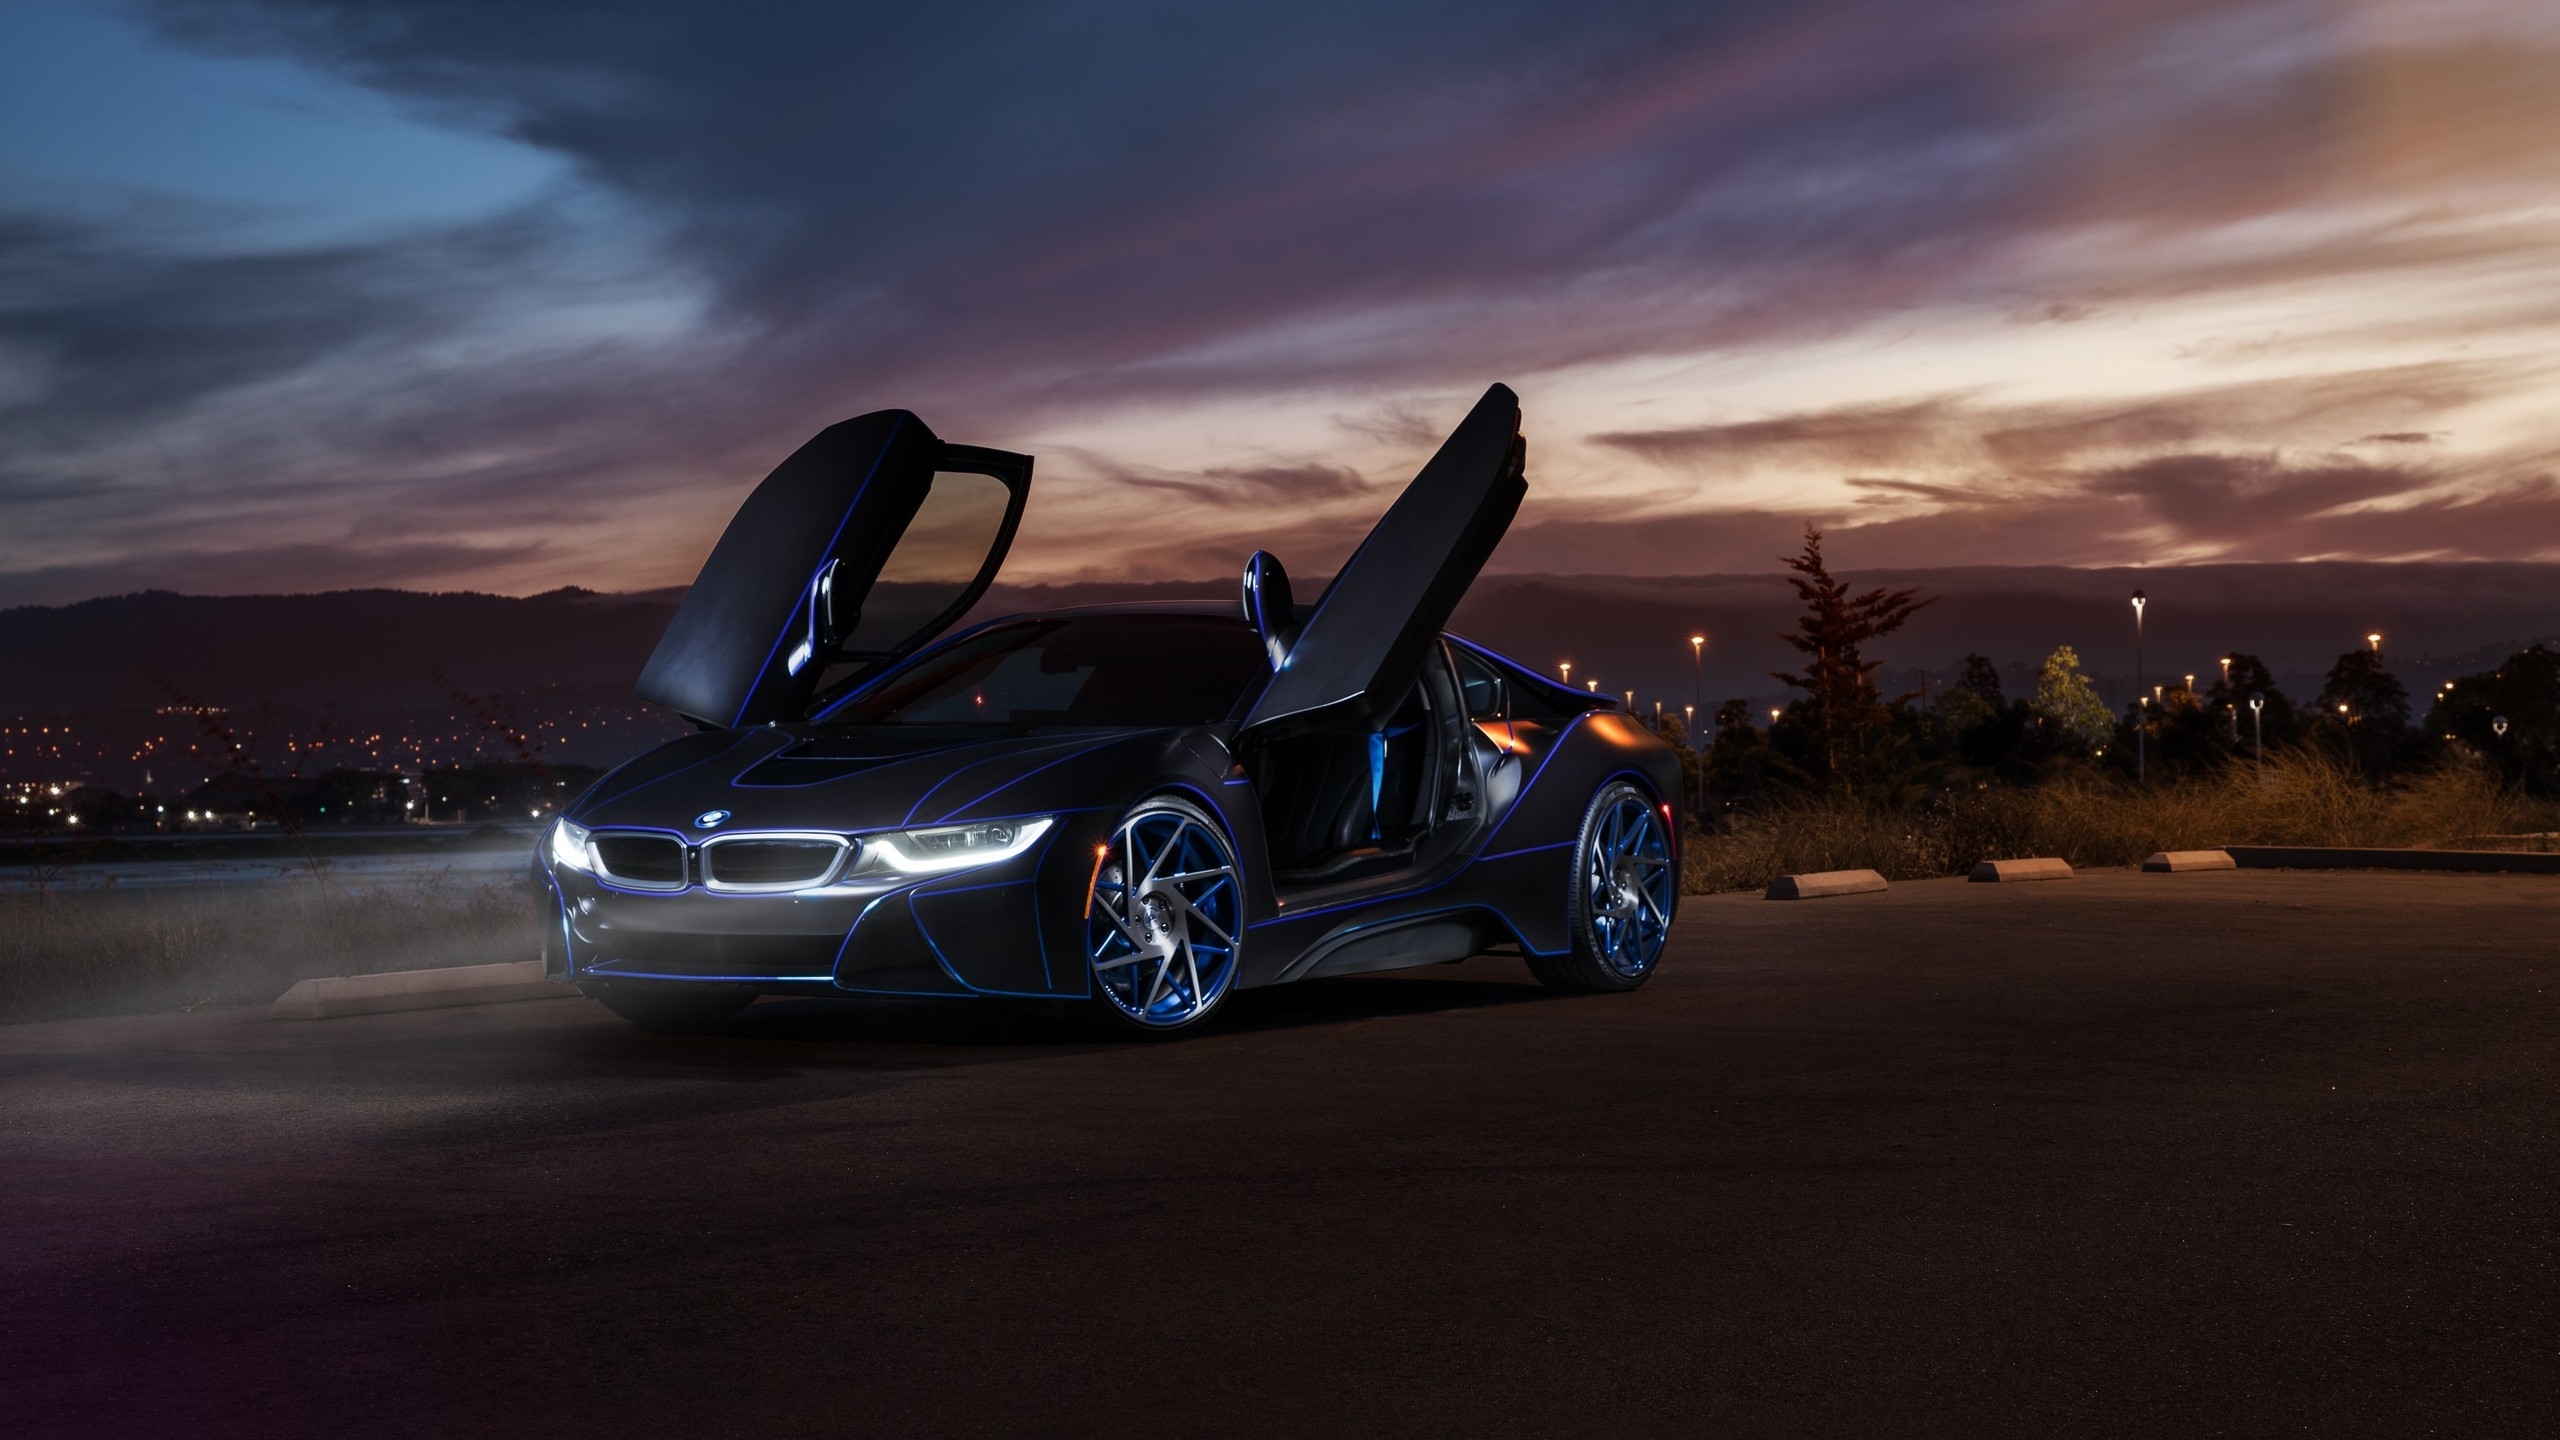 Gorgeous New BMW i8 for 2560x1440 HDTV resolution